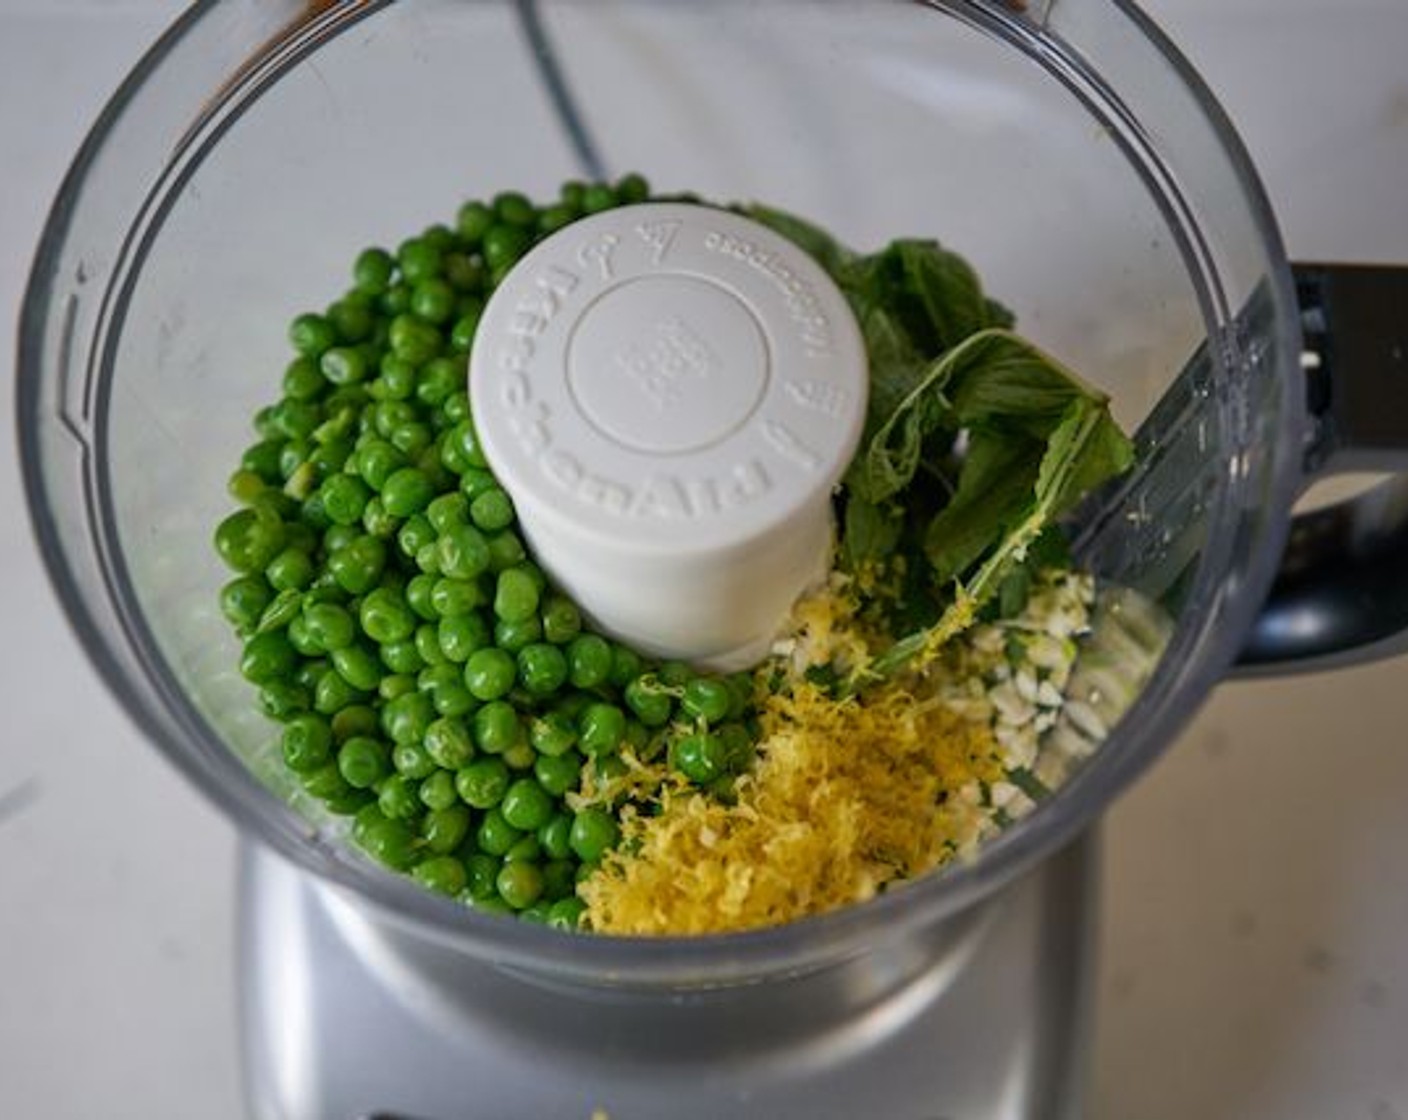 step 6 In a food processor, add peas, chopped Garlic (1 clove), zest of the Lemons (3) (reserving about 1/2 tsp for garnish) and 3 Tbsp juice, Fresh Mint Leaves (8), and Olive Oil (1/4 cup). Season with a pinch of Kosher Salt (to taste) and Freshly Ground Black Pepper (to taste). Pulse until the mixture is coarse. You don’t want pea pureé.